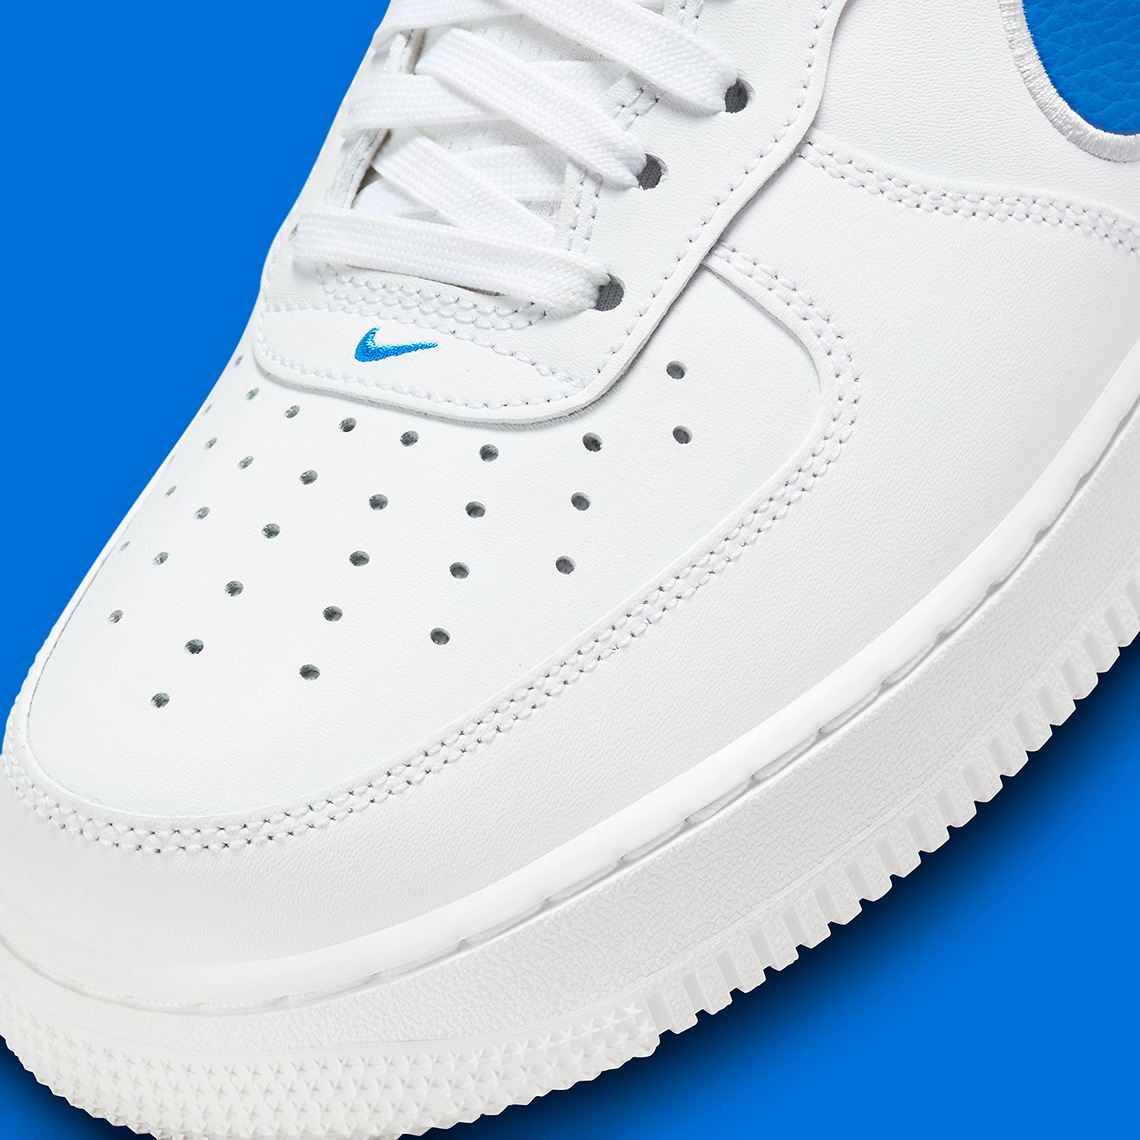 nike air force 1 low white blue fn7804 100 7